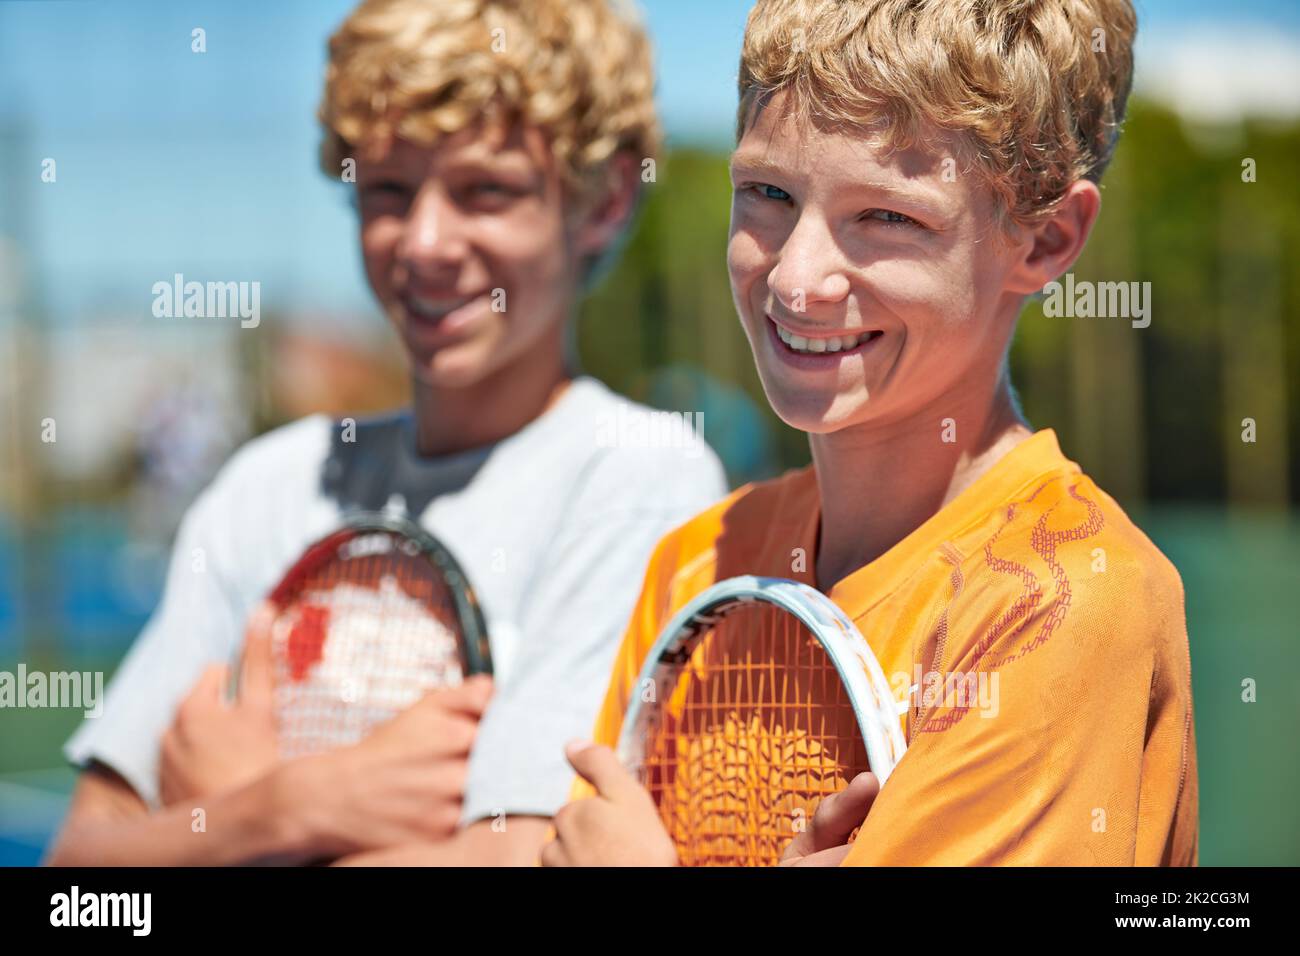 Tennis is their sport of choice. Two friends standing together and holding their tennis rackets on the court. Stock Photo